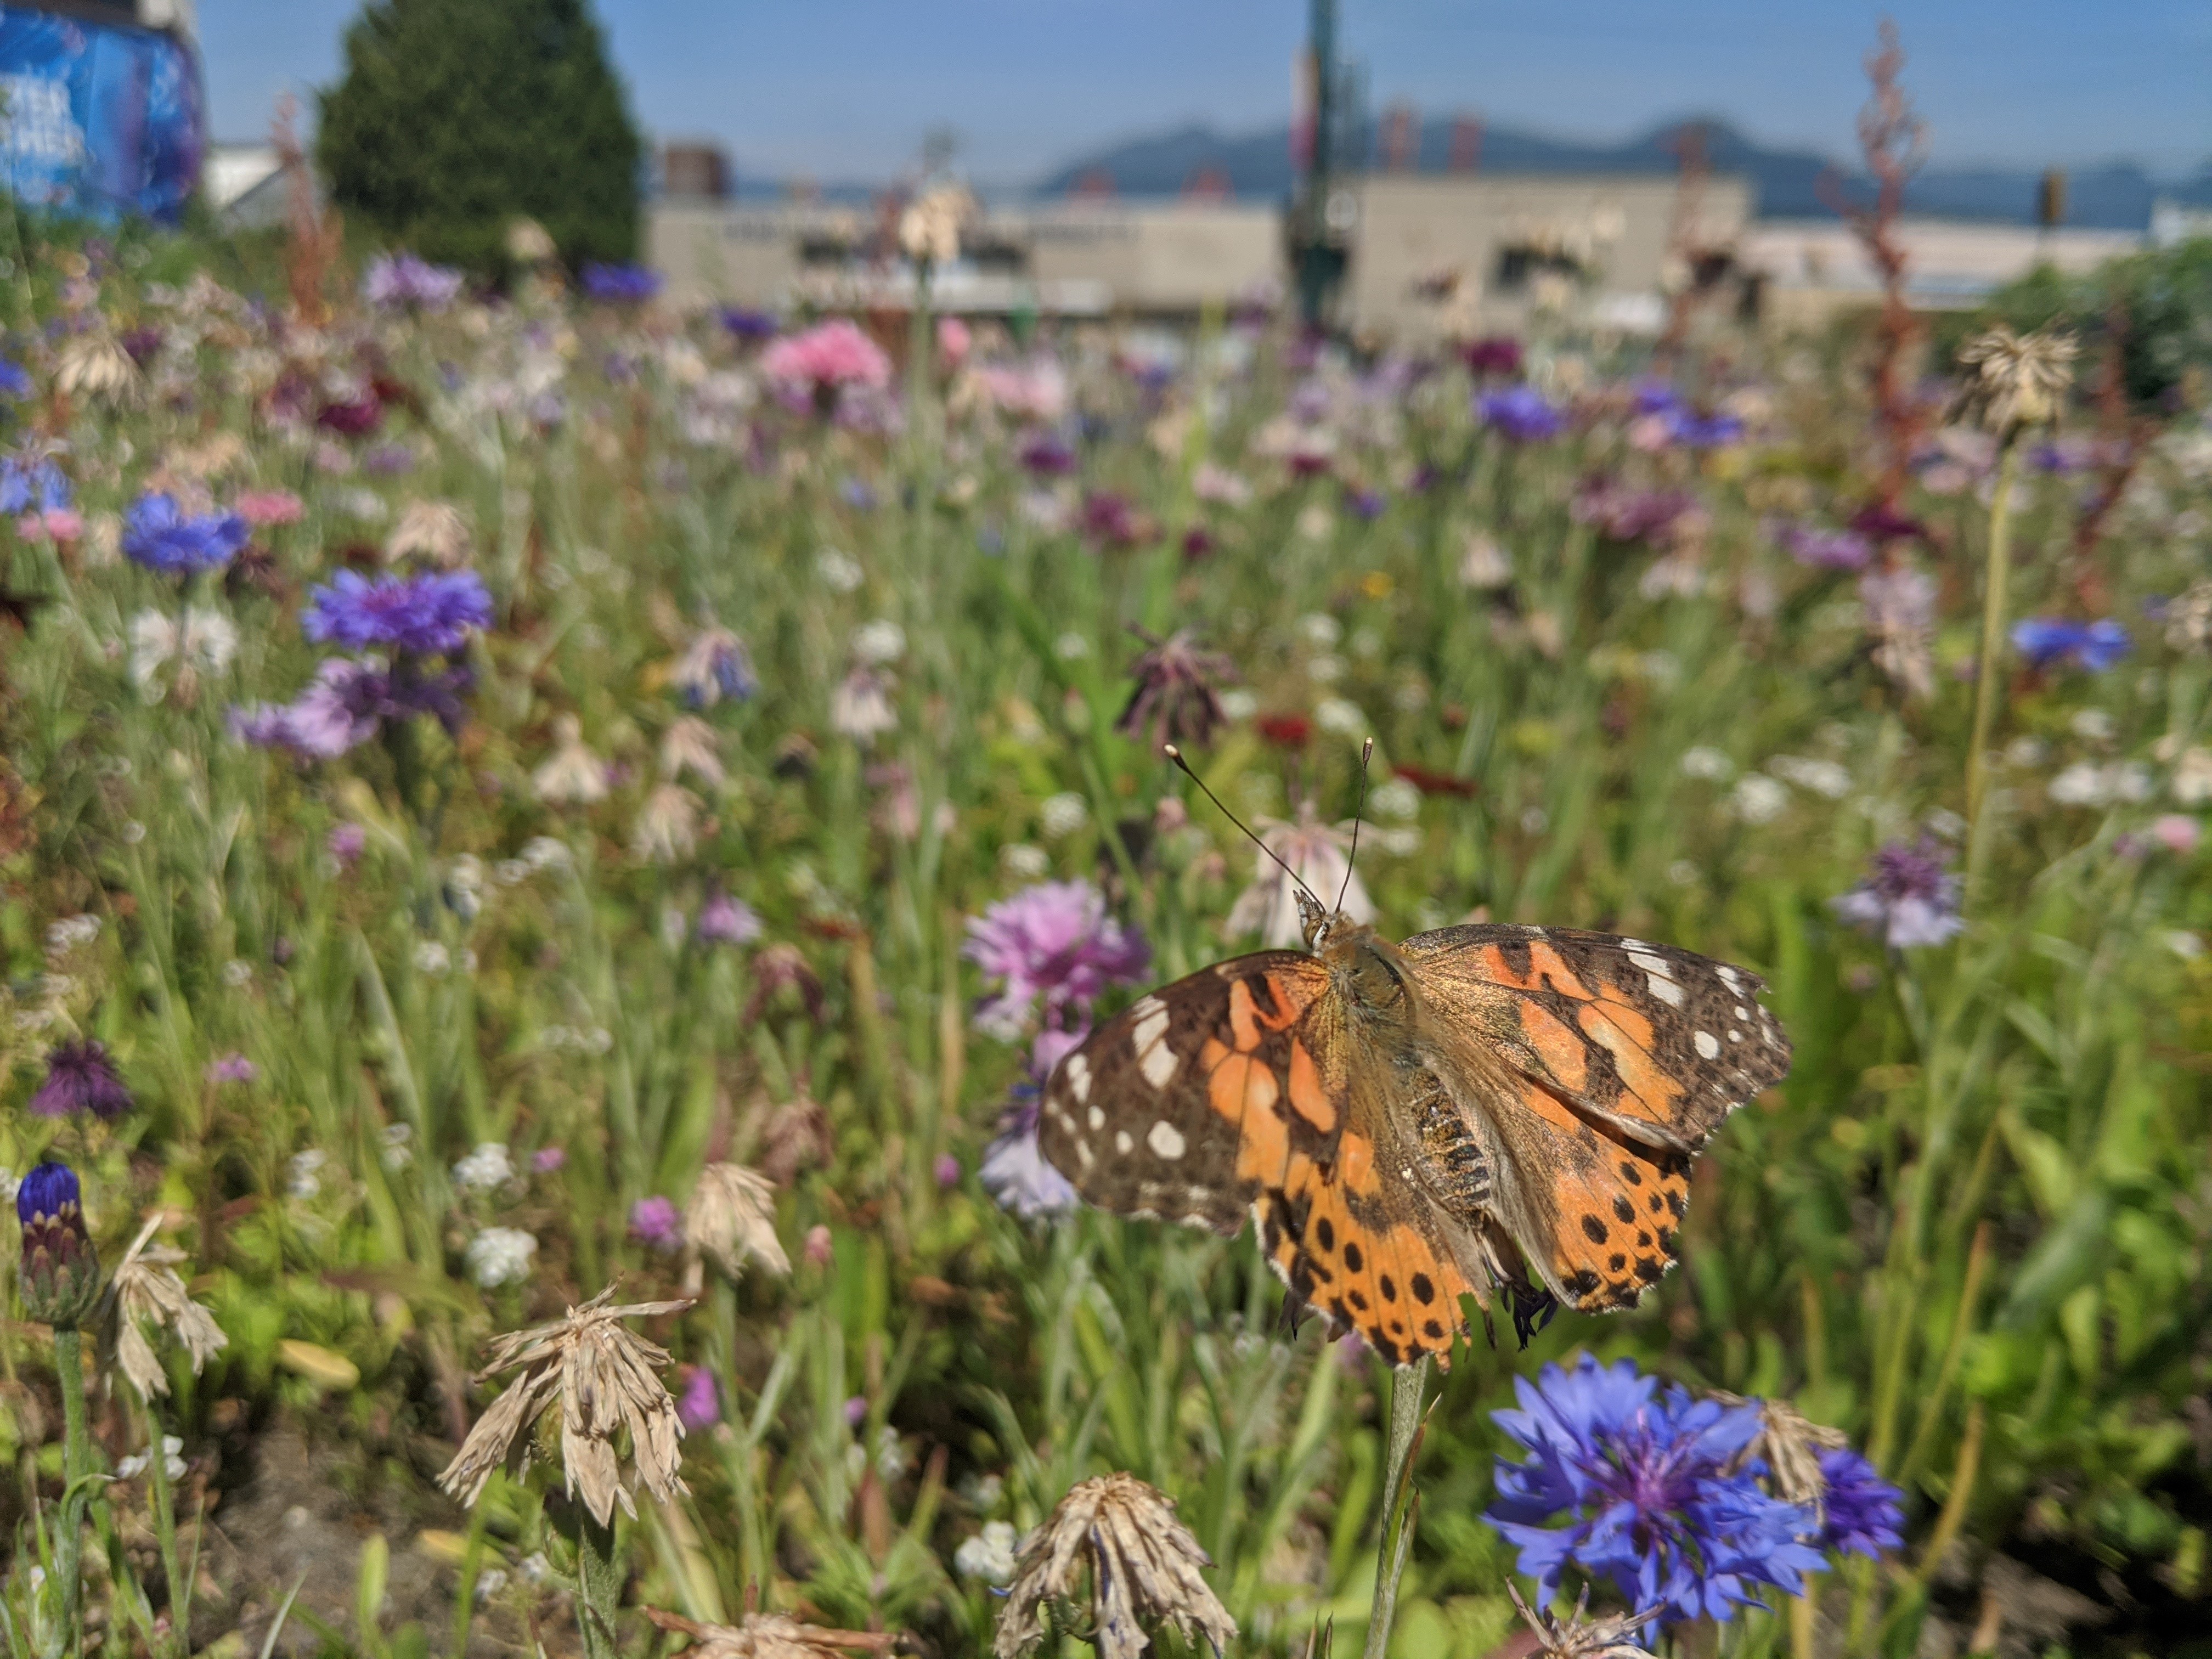 Close-up photograph of a butterfly perched among wildflowers with signs of low buildings in the far distance